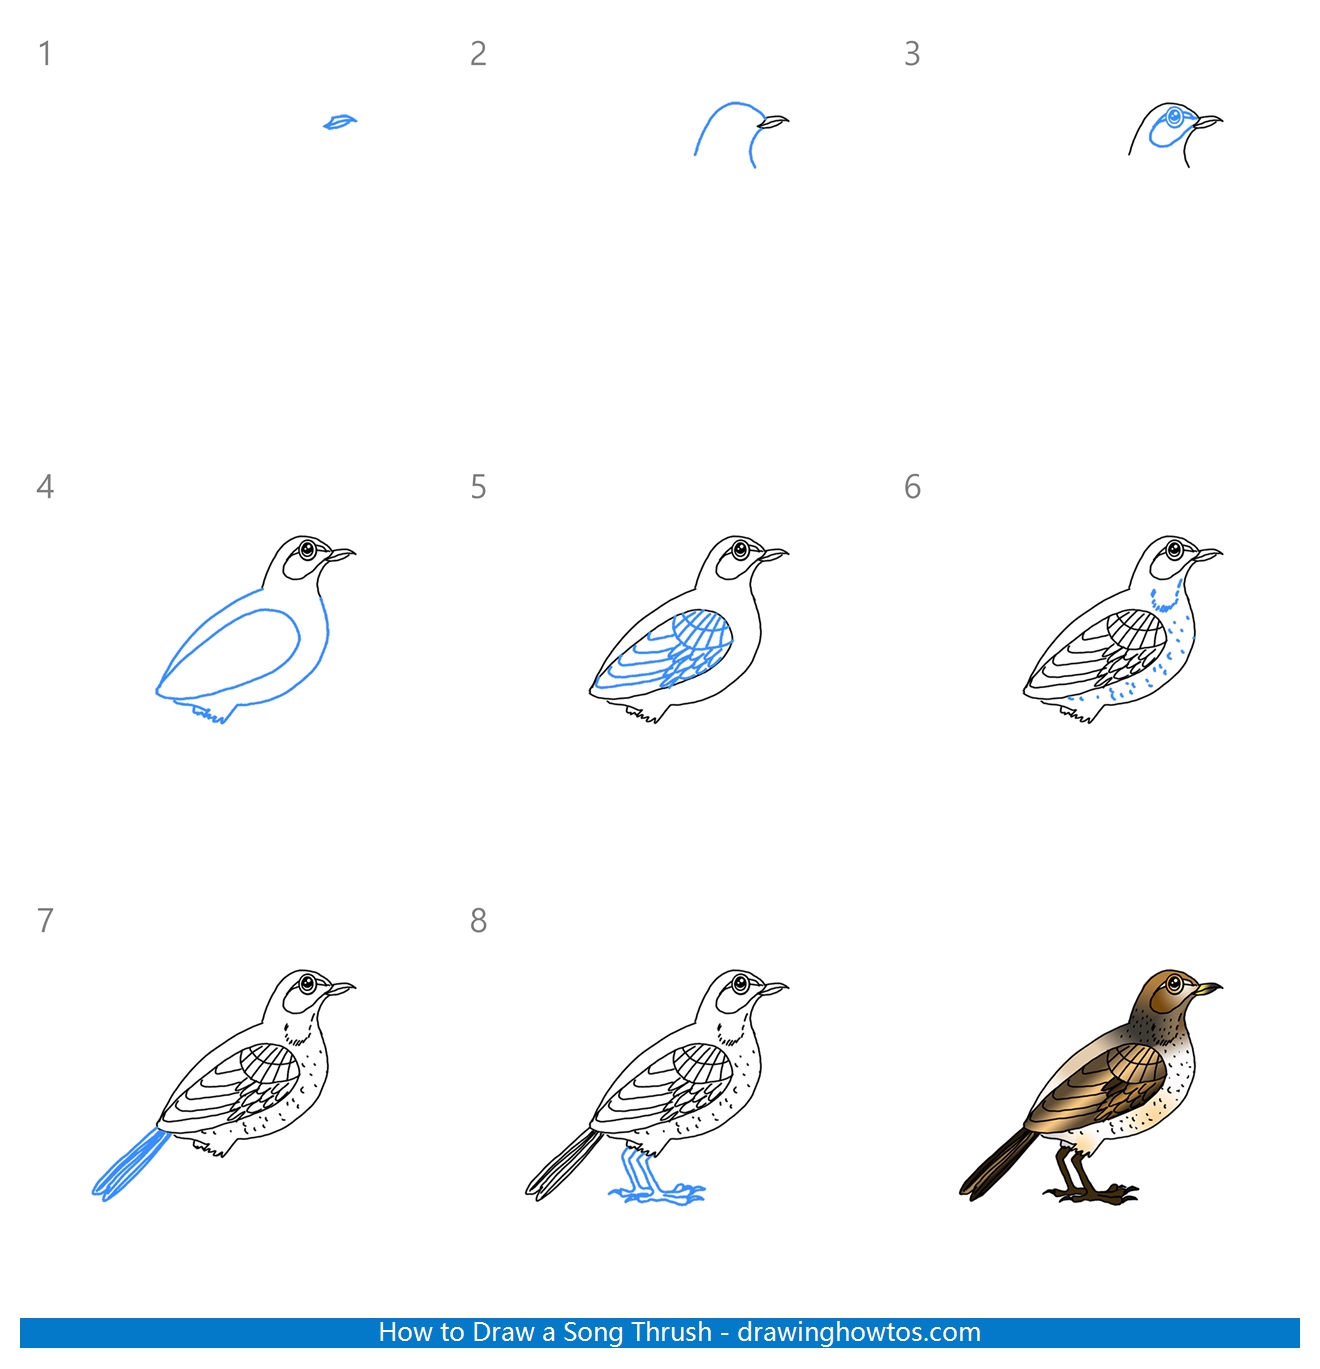 How to Draw a Song Thrush Step by Step